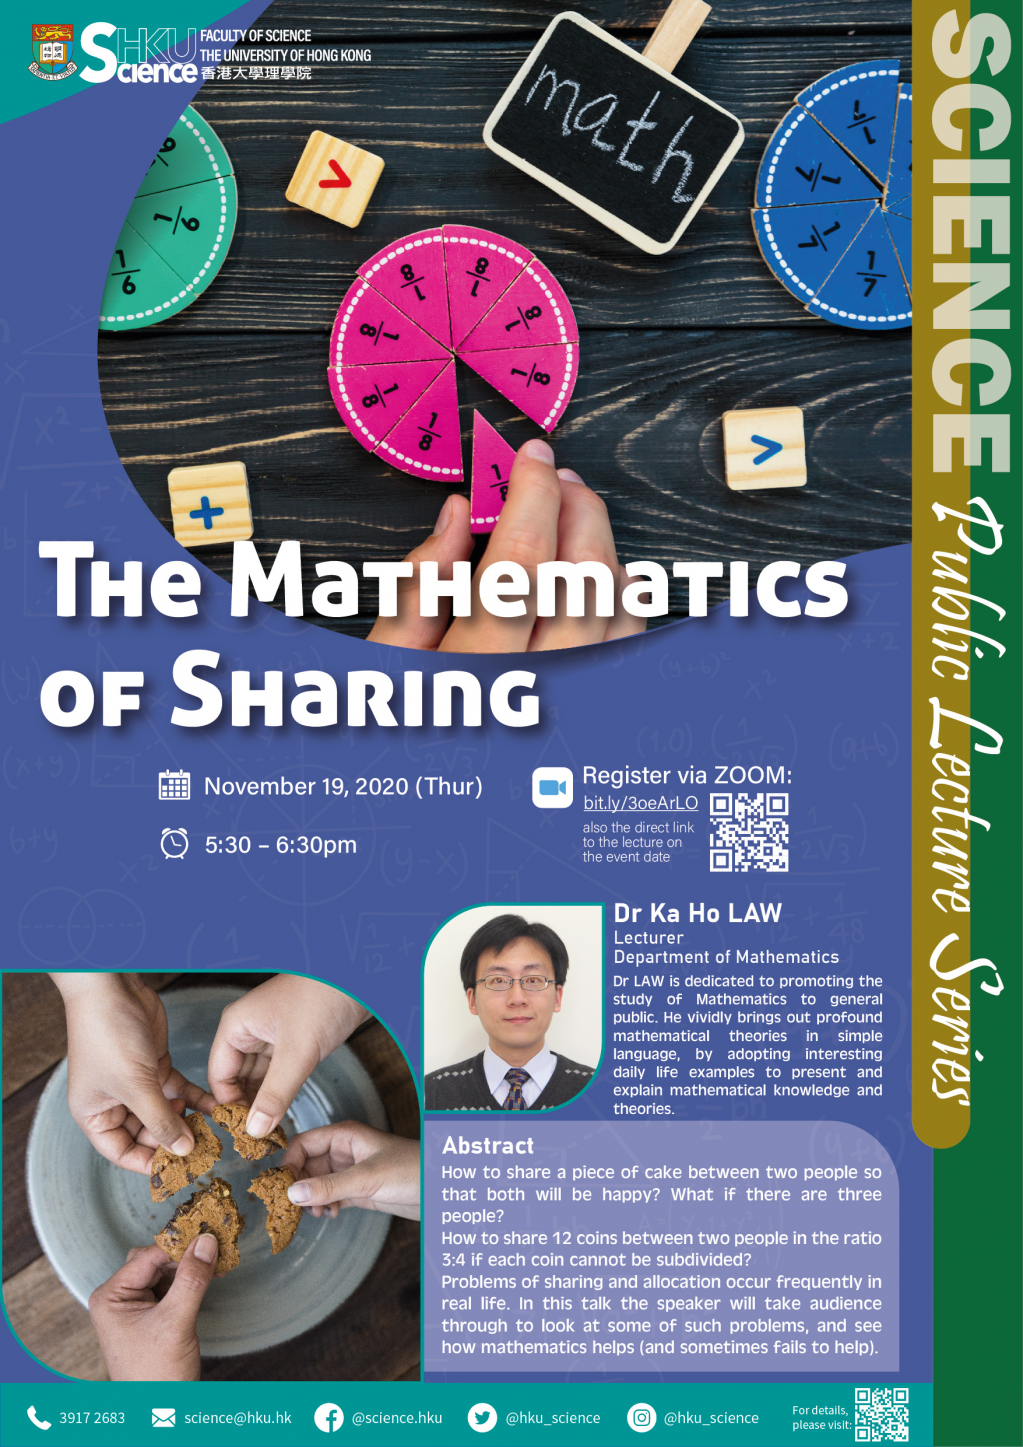 HKU Science public lecture series@ZOOM - The Mathematics of Sharing (Nov 19, 2020)